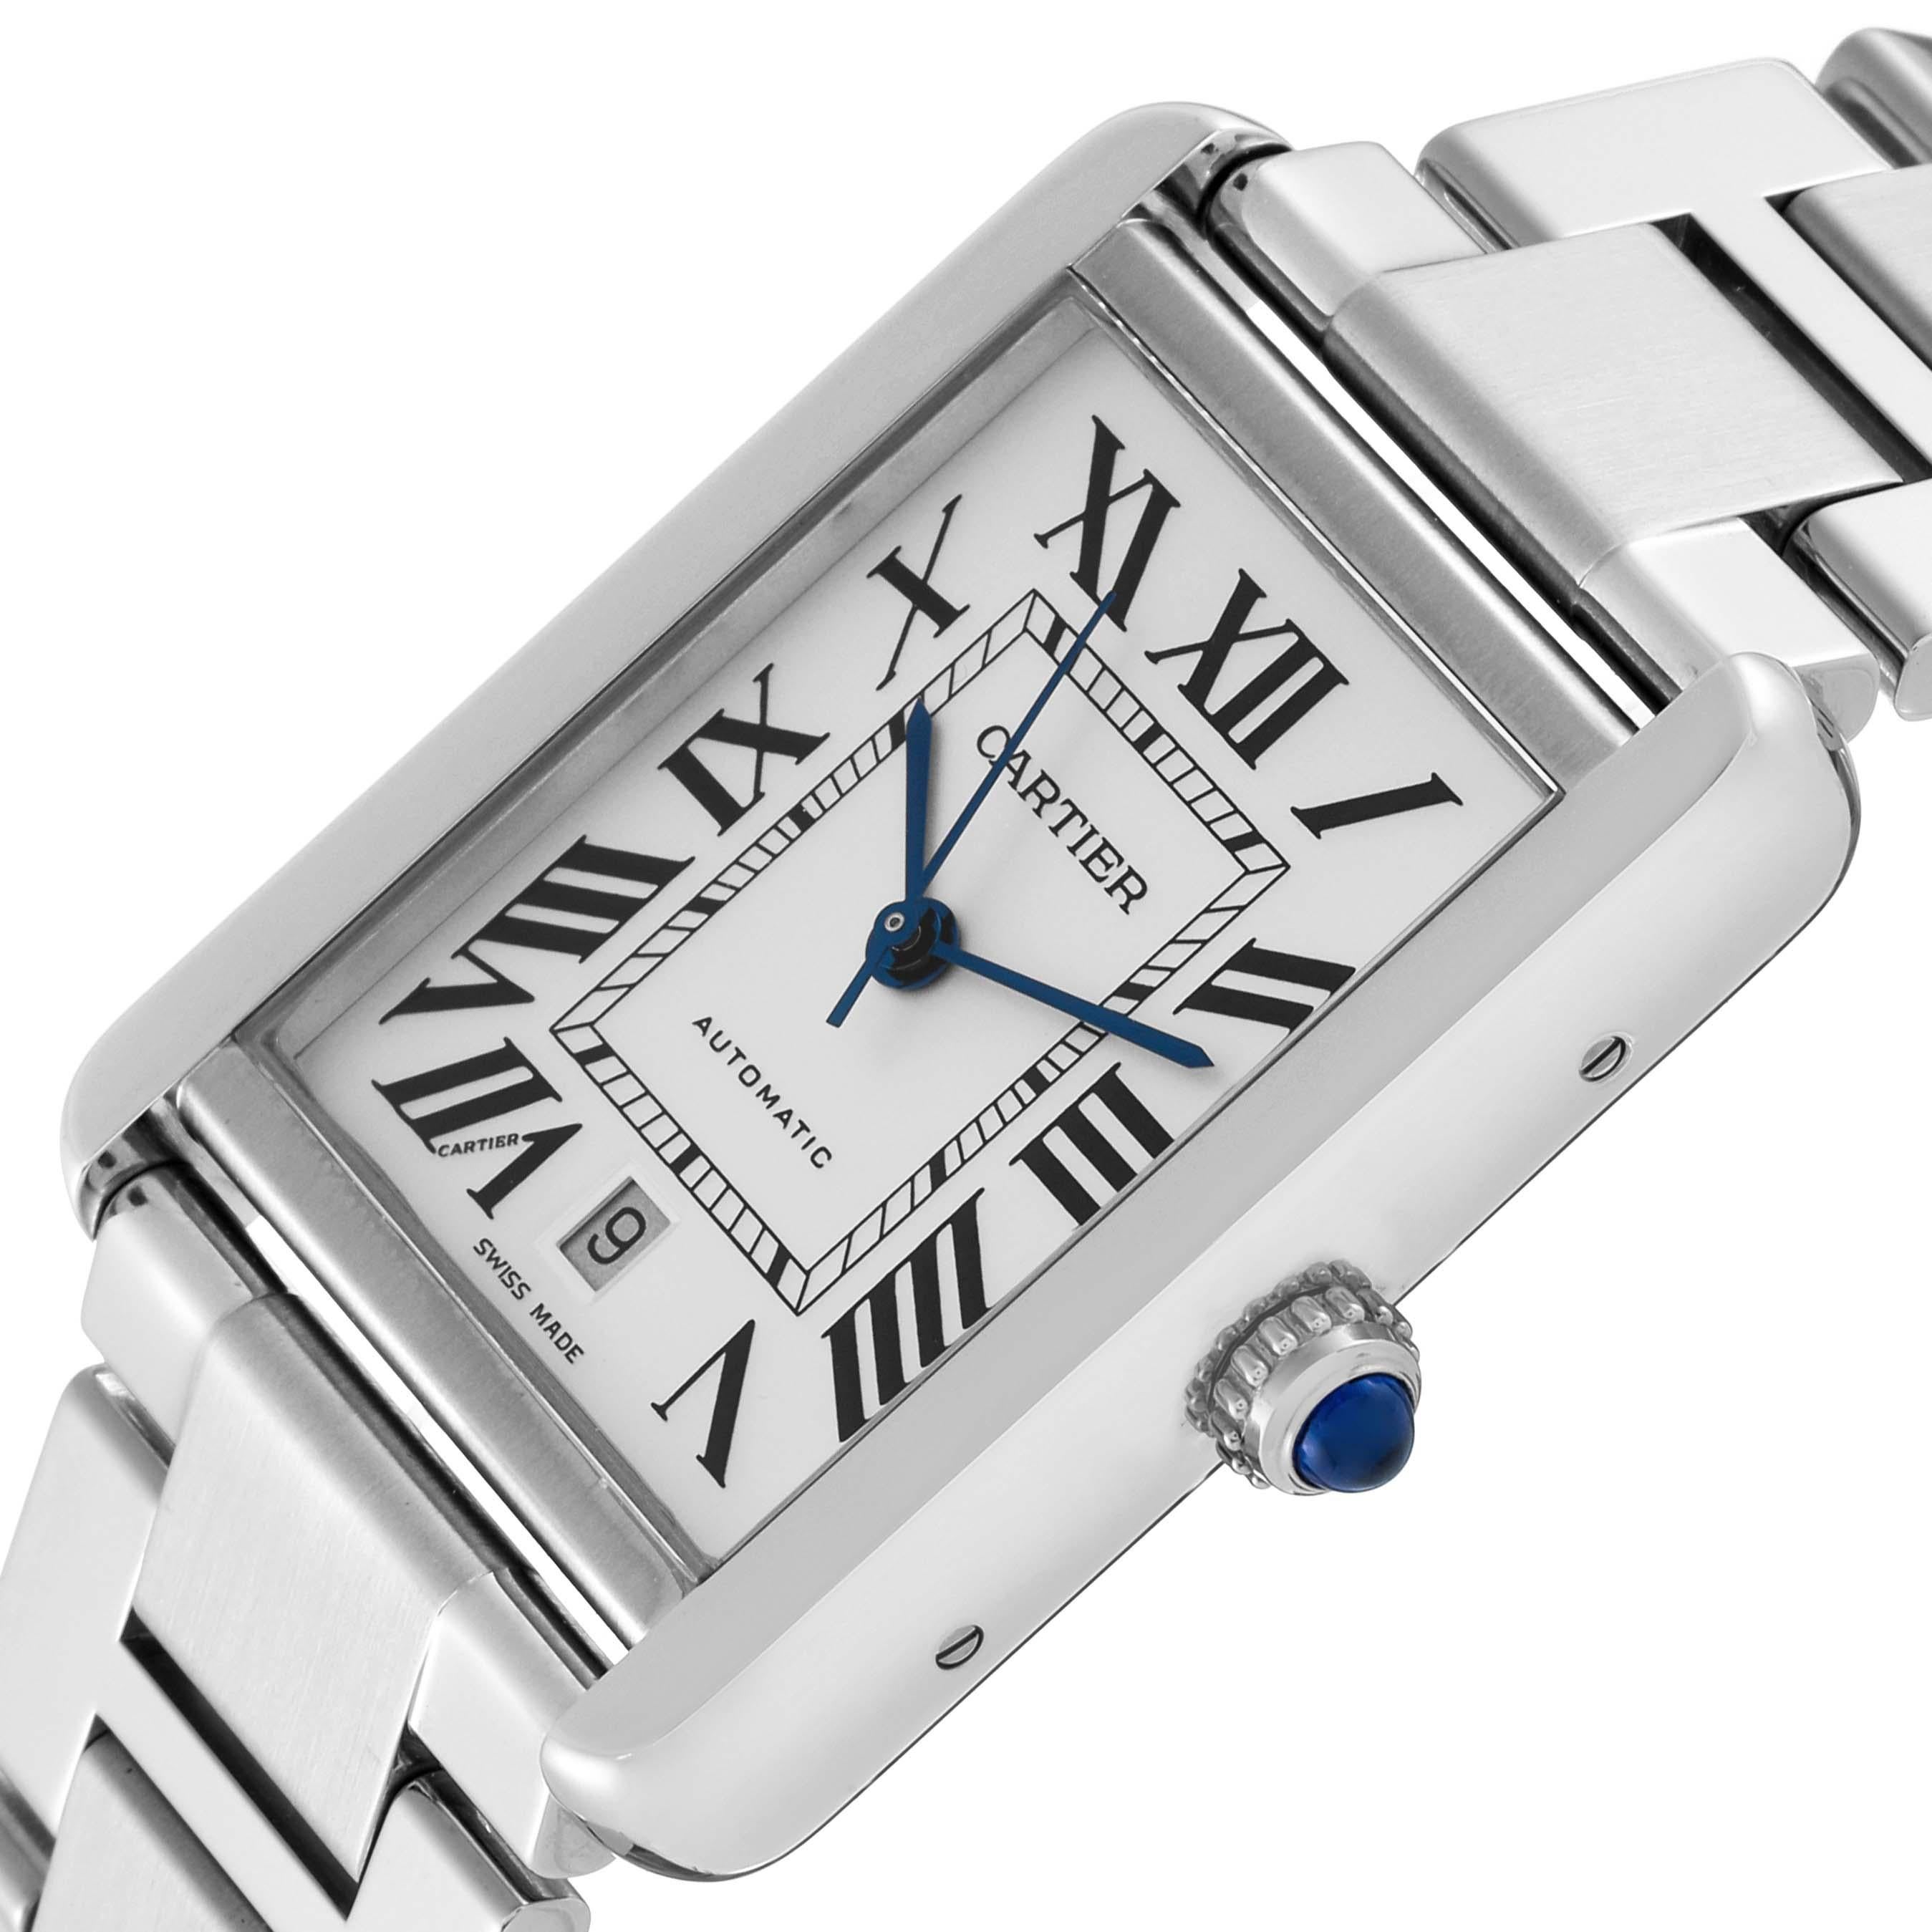 Cartier Tank Solo XL Silver Dial Automatic Steel Mens Watch W5200028. Automatic self-winding movement. Stainless steel case 31.0 x 40.85 mm. Circular grained crown set with a blue spinel cabochon. . Scratch resistant sapphire crystal. Silver opaline